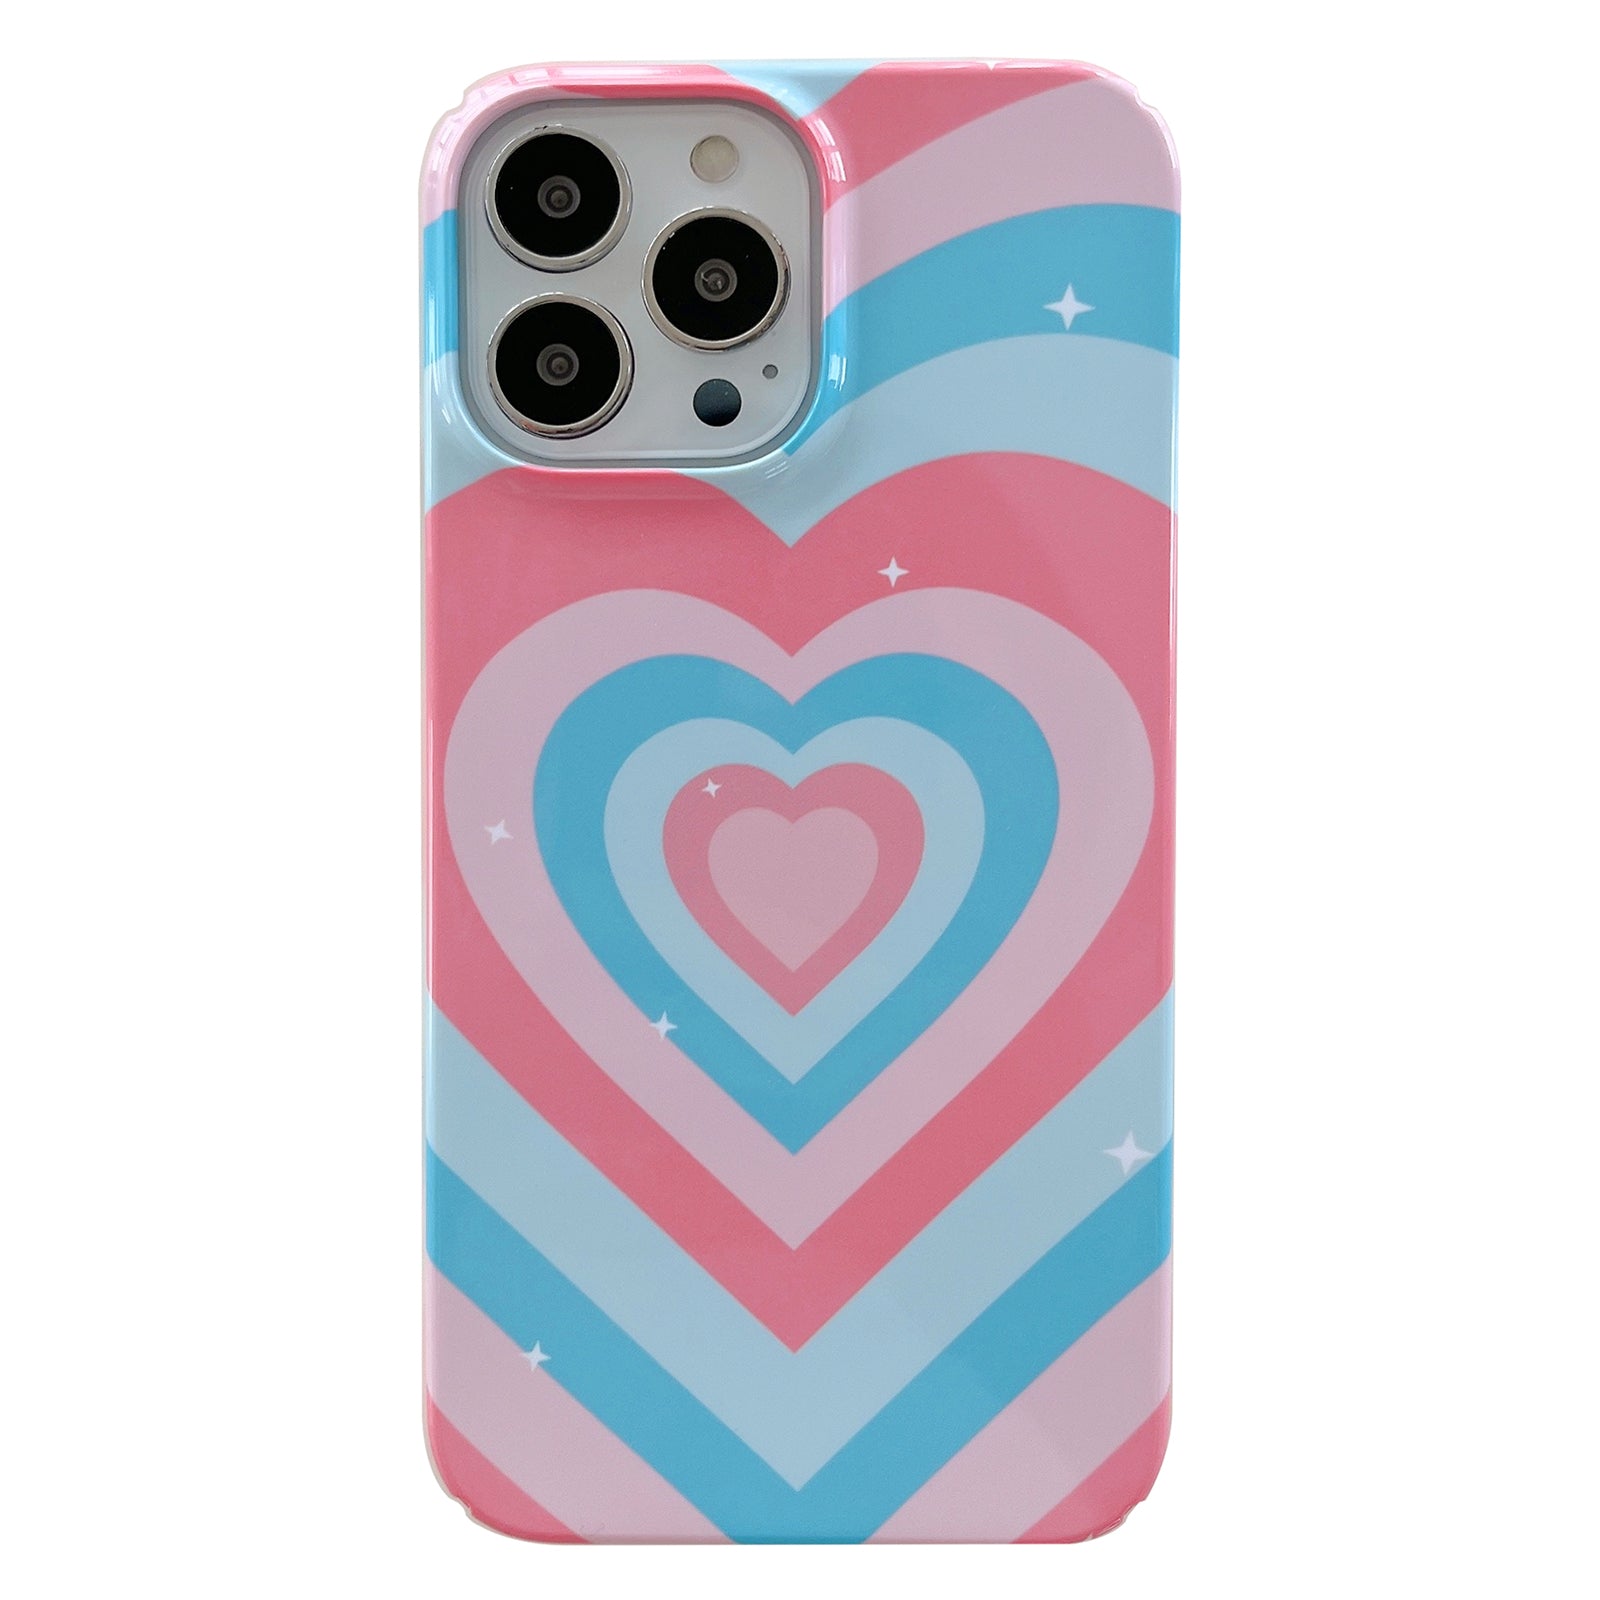 Hard PC Phone Cover for iPhone 12 Pro 6.1 inch Pattern Printing Anti-Drop Glossy Phone Case - Pink Blue Heart